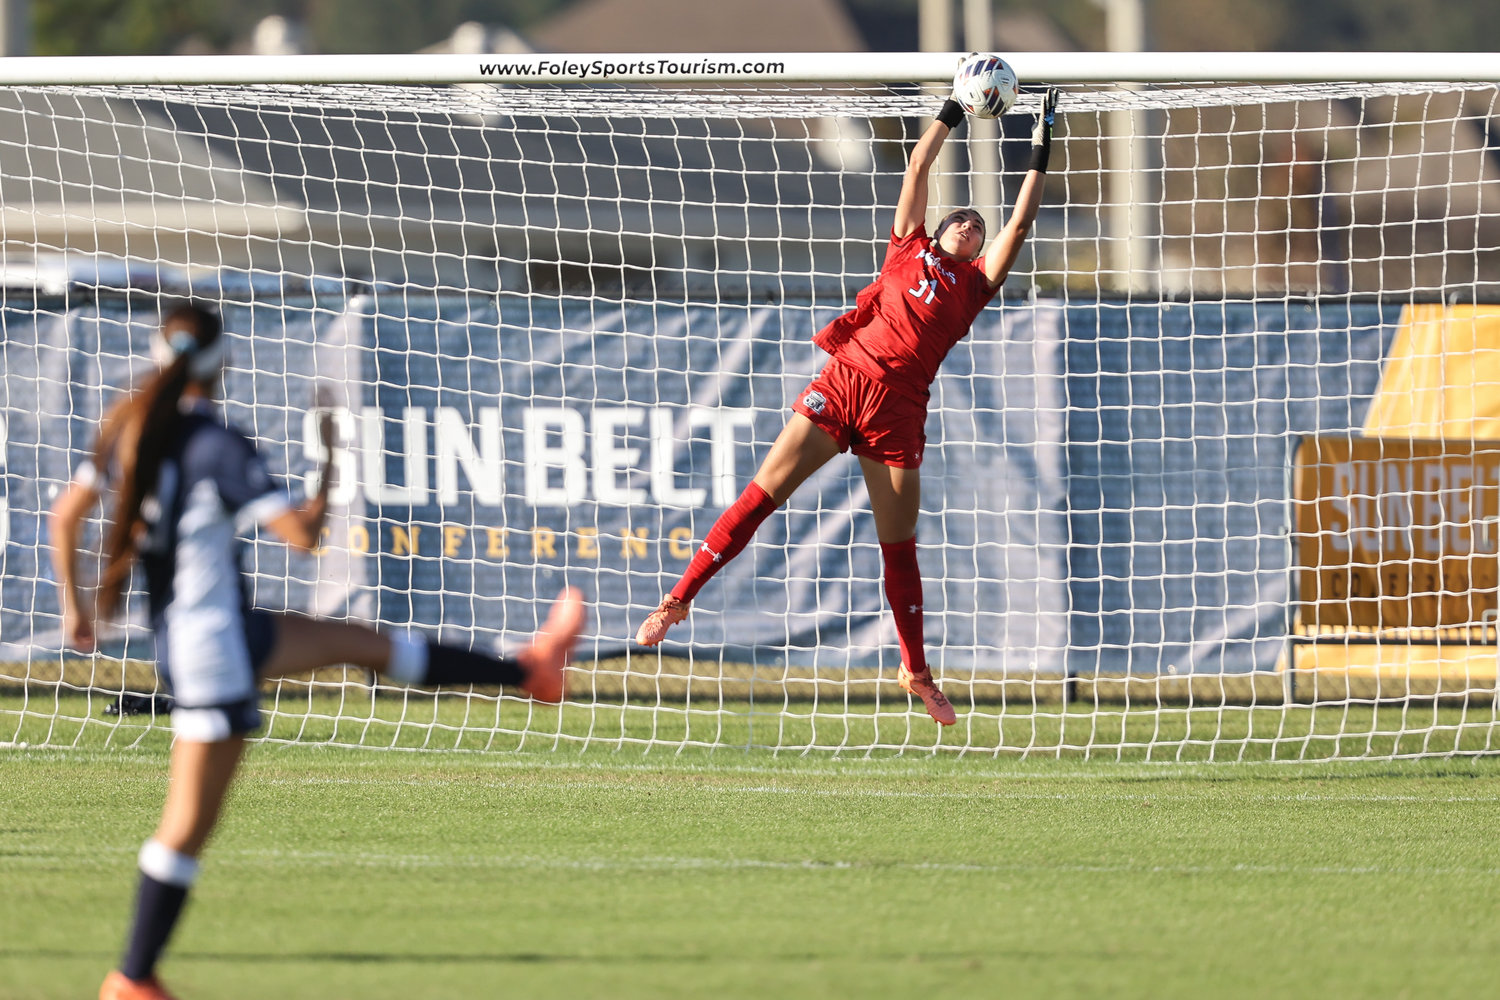 Monarch junior Erin Jones leaps to make a save during the Sun Belt Conference Championship match between Old Dominion and James Madison Sunday afternoon in Foley. The Monarchs beat the Dukes 4-3 in overtime to win the conference championship in their first year of competition.